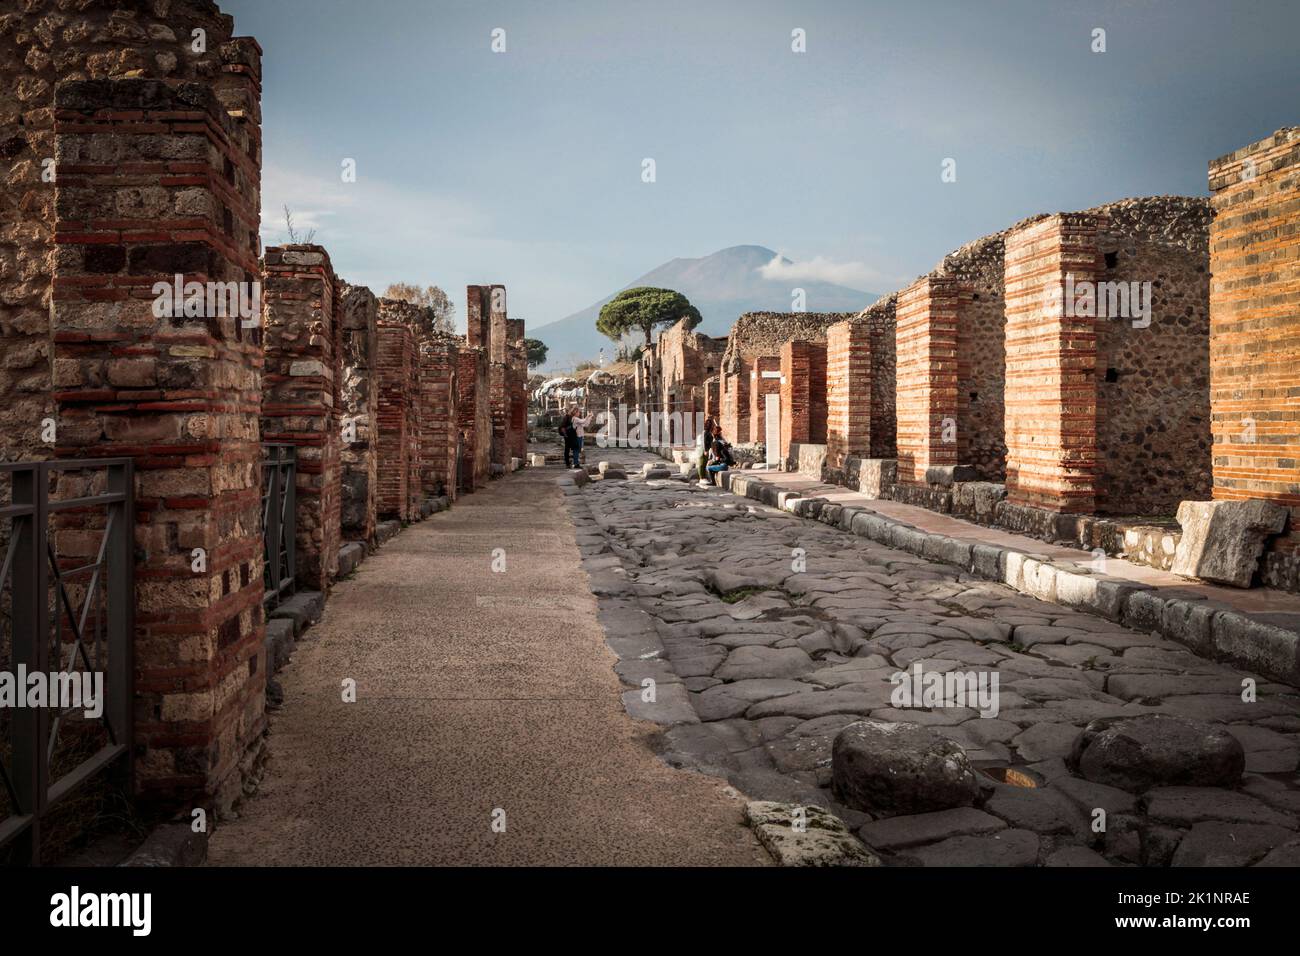 Mount Vesuvius looms over the archaeological park / town of Pompeii, a UNESCO World Heritage Site, Naples, Italy Stock Photo